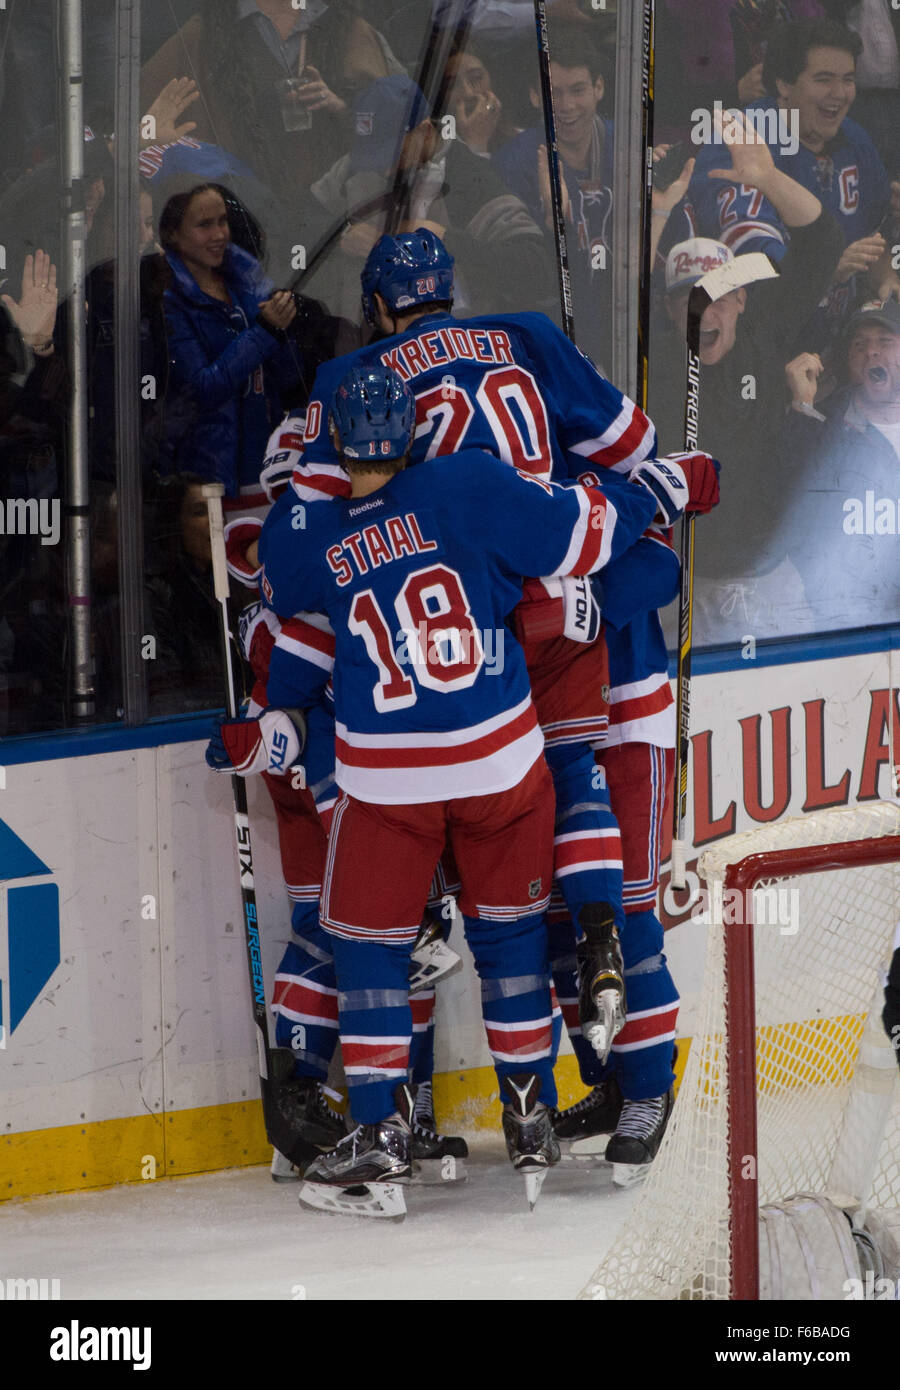 New York, NY, USA. 15th Nov, 2015. New York Rangers celebrate a goal by center Derek Stepan (21) in the 2nd period of an NHL hockey game, Madison Square Garden, Sunday, Nov. 15, 2015. Credit:  Bryan Smith/ZUMA Wire/Alamy Live News Stock Photo